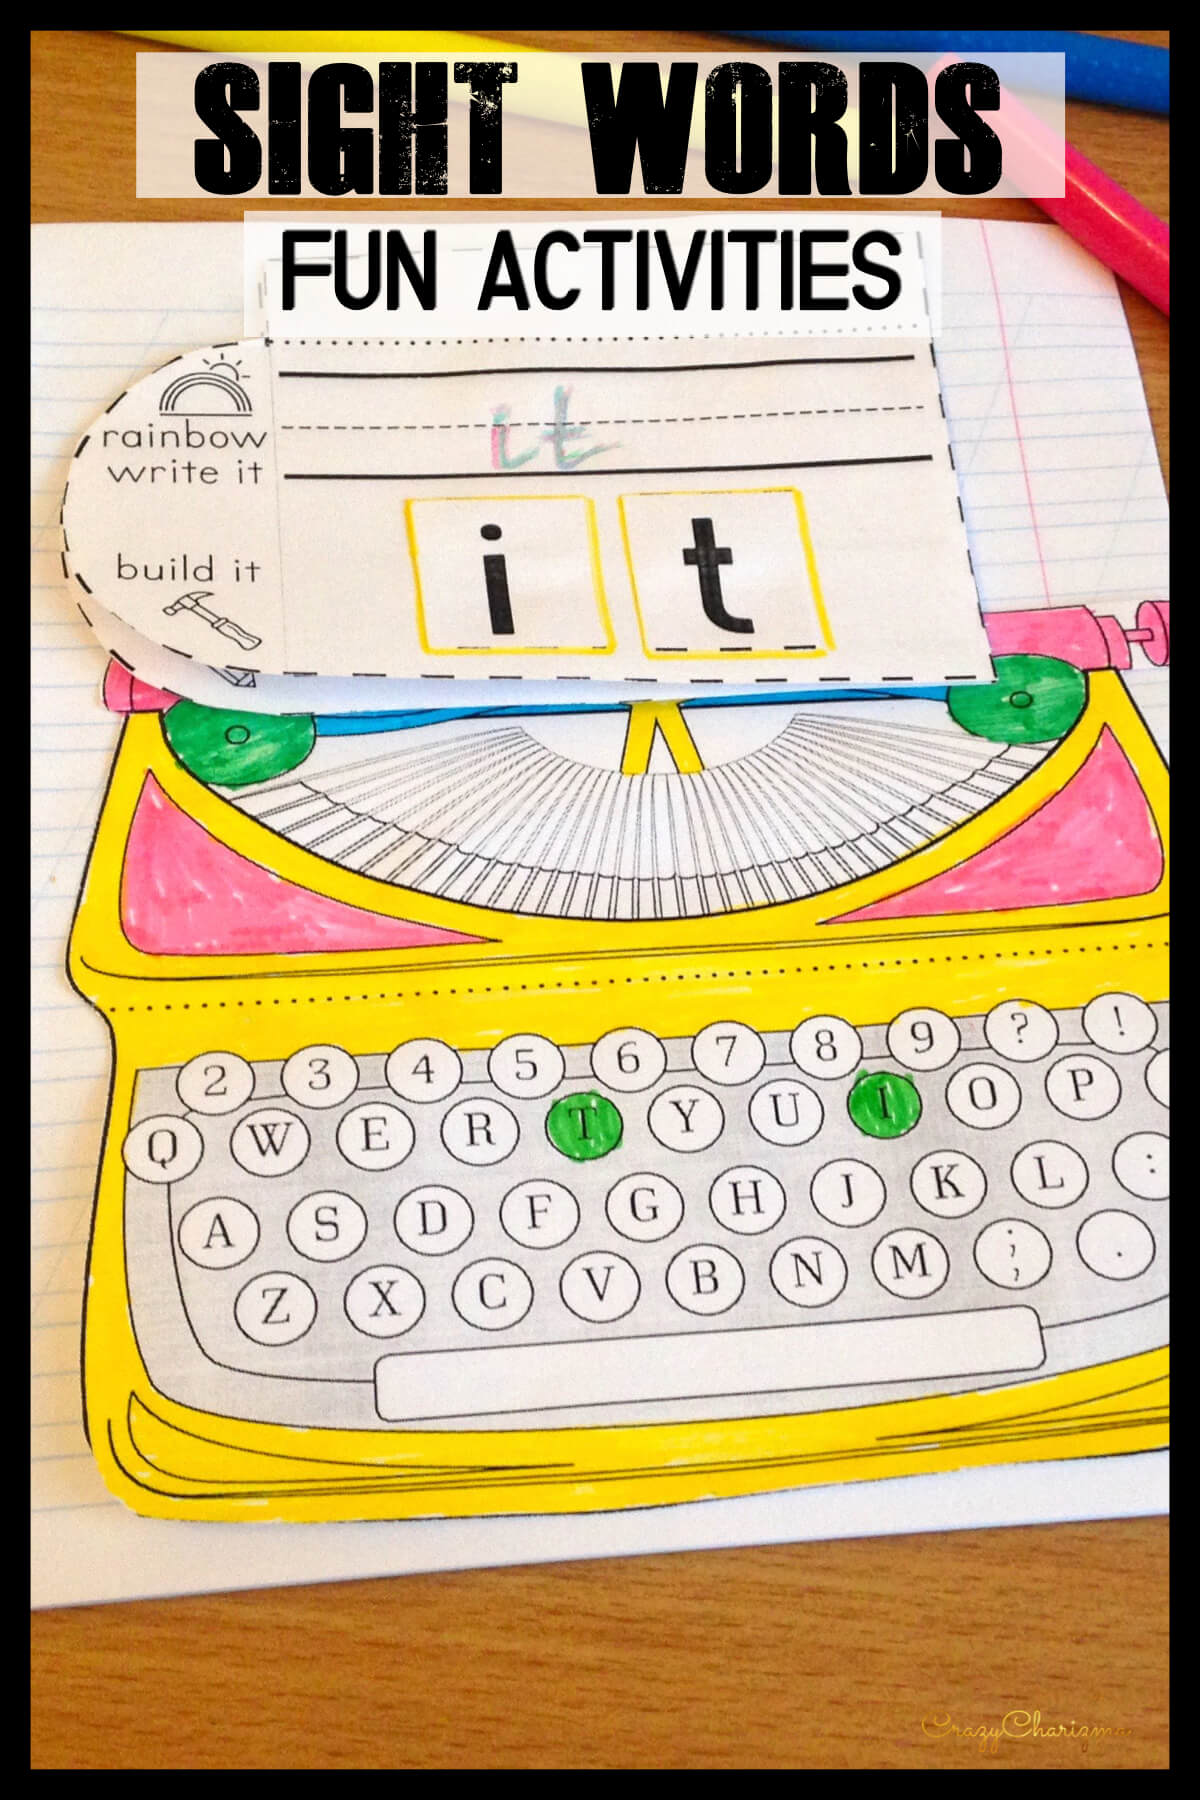 Need lots of activities to master sight words from pre-primer list? This set provides practice at the beginning reading level, and introduces 40 of the most common sight words. Kids will read more fluently and write with greater ease.